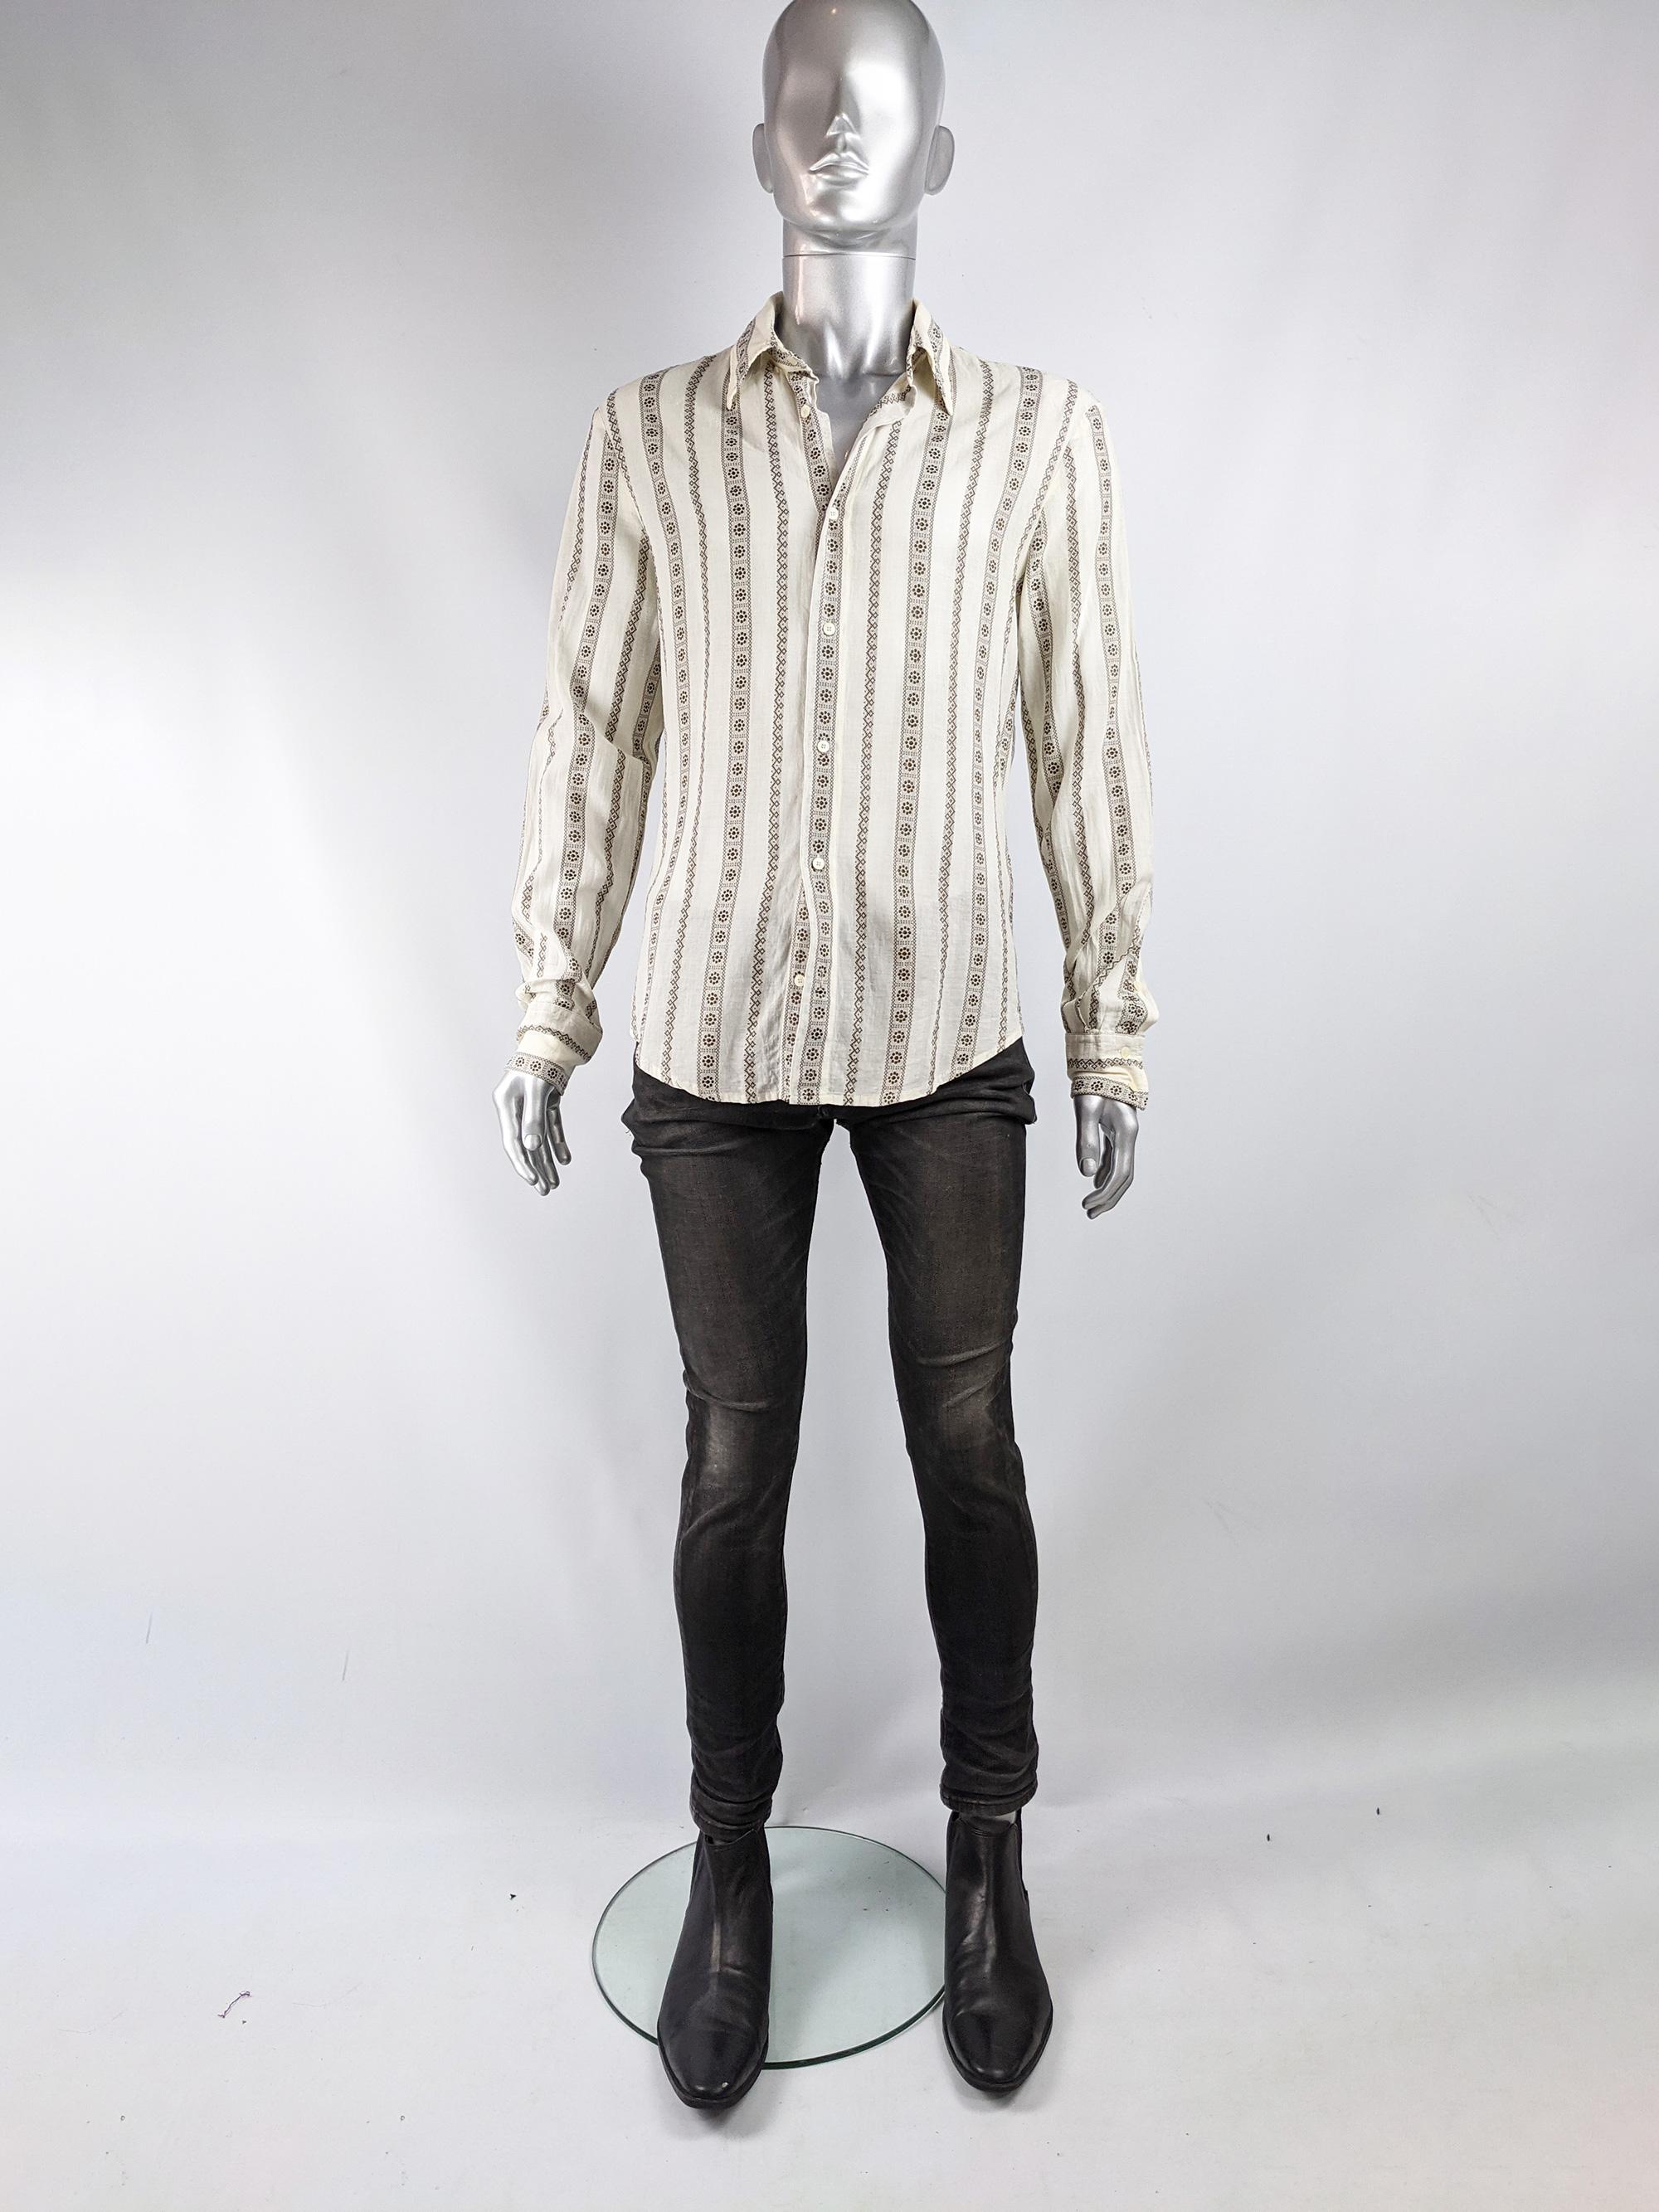 A stylish vintage mens shirt by Roberto Cavalli for the Just Cavalli line, from c. the late 90s. In an off white cotton blend with a brown floral brocade pattern throughout creating a boho style look. 

Size: Marked IT 50 which equates to a mens